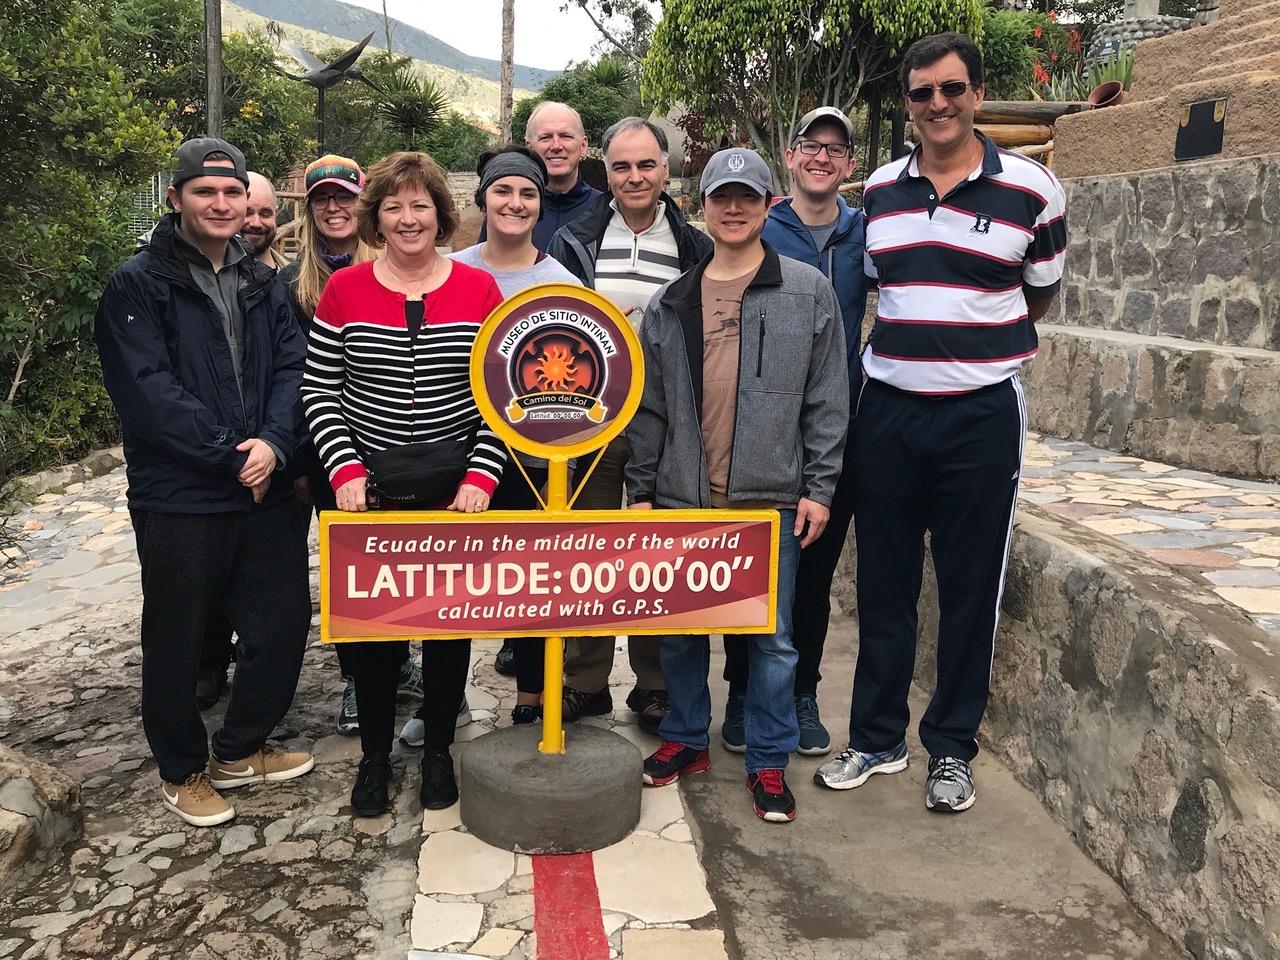 The team in Ecuador, from left to right: Zach Quanbeck, MD, PGY-1, Sara Van Nortwick, MD, Deb Koop, Lauren Casnovsky, MD, PGY-4, Steve Koop, MD, Alejandro de la Maza, MD, Walter Truong, MD, Mikhail Klimstra, MD, PGY-4, Leo Abrahao, MD